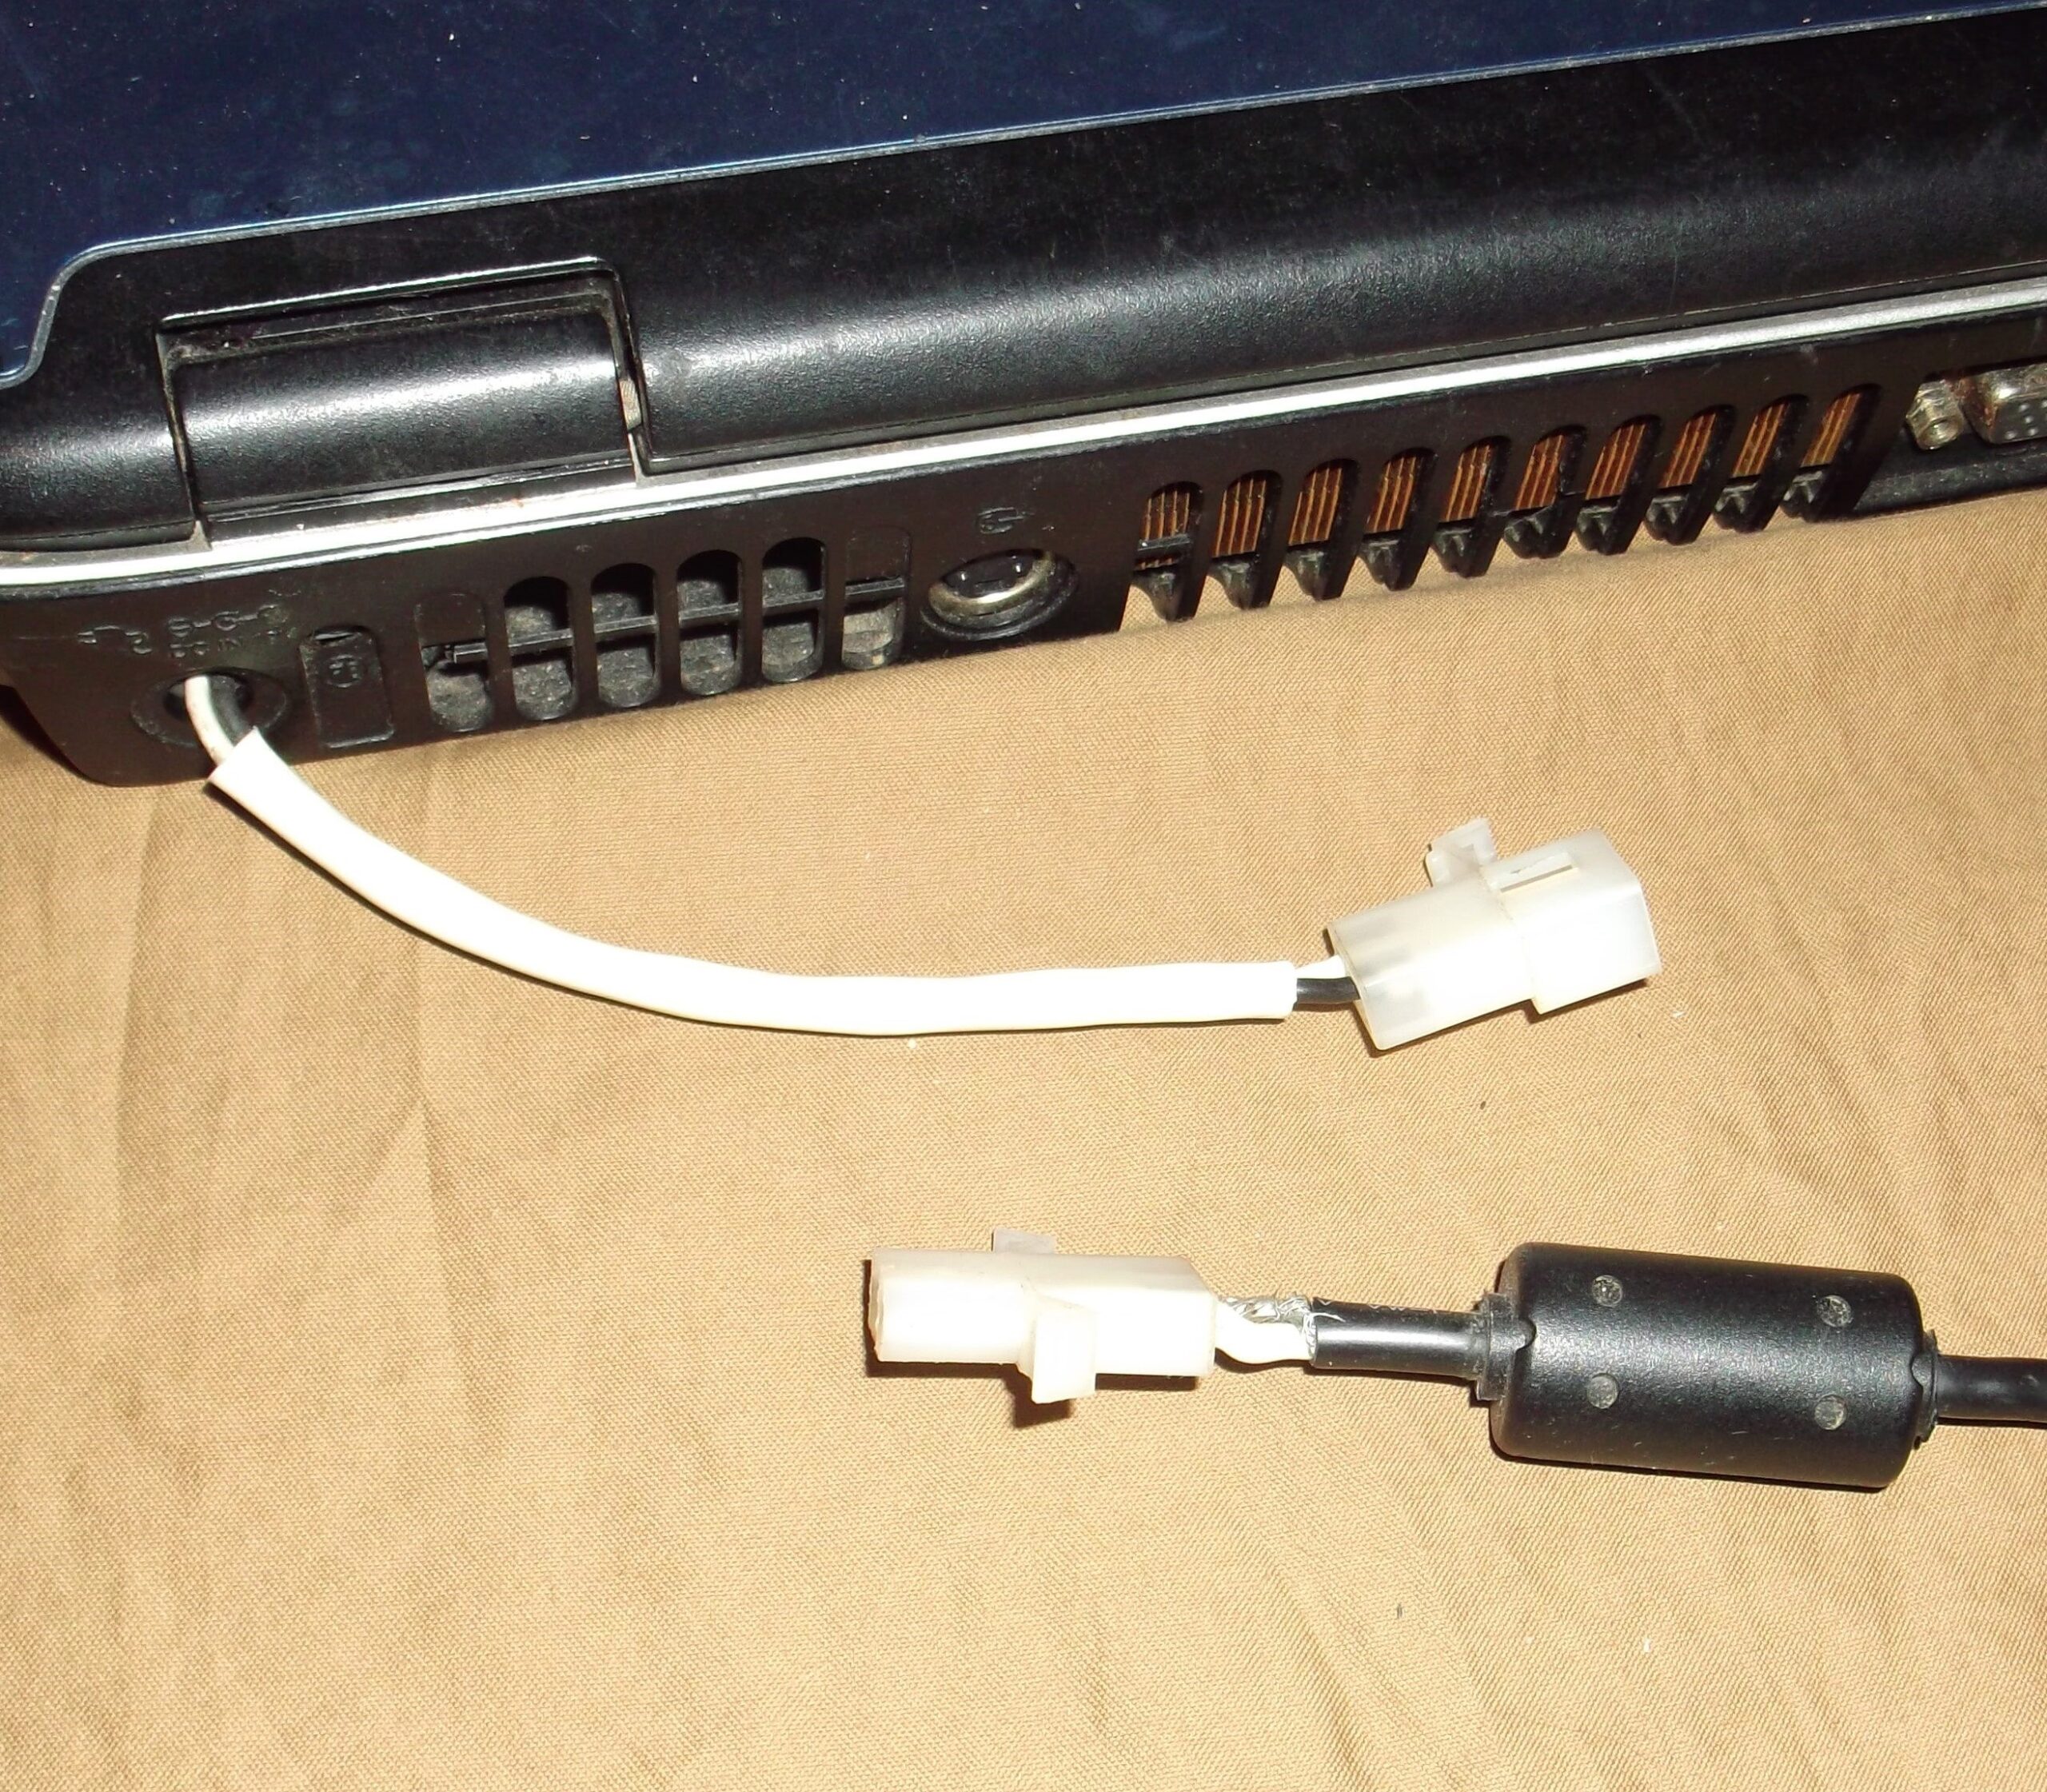 charge a laptop with a broken charger port